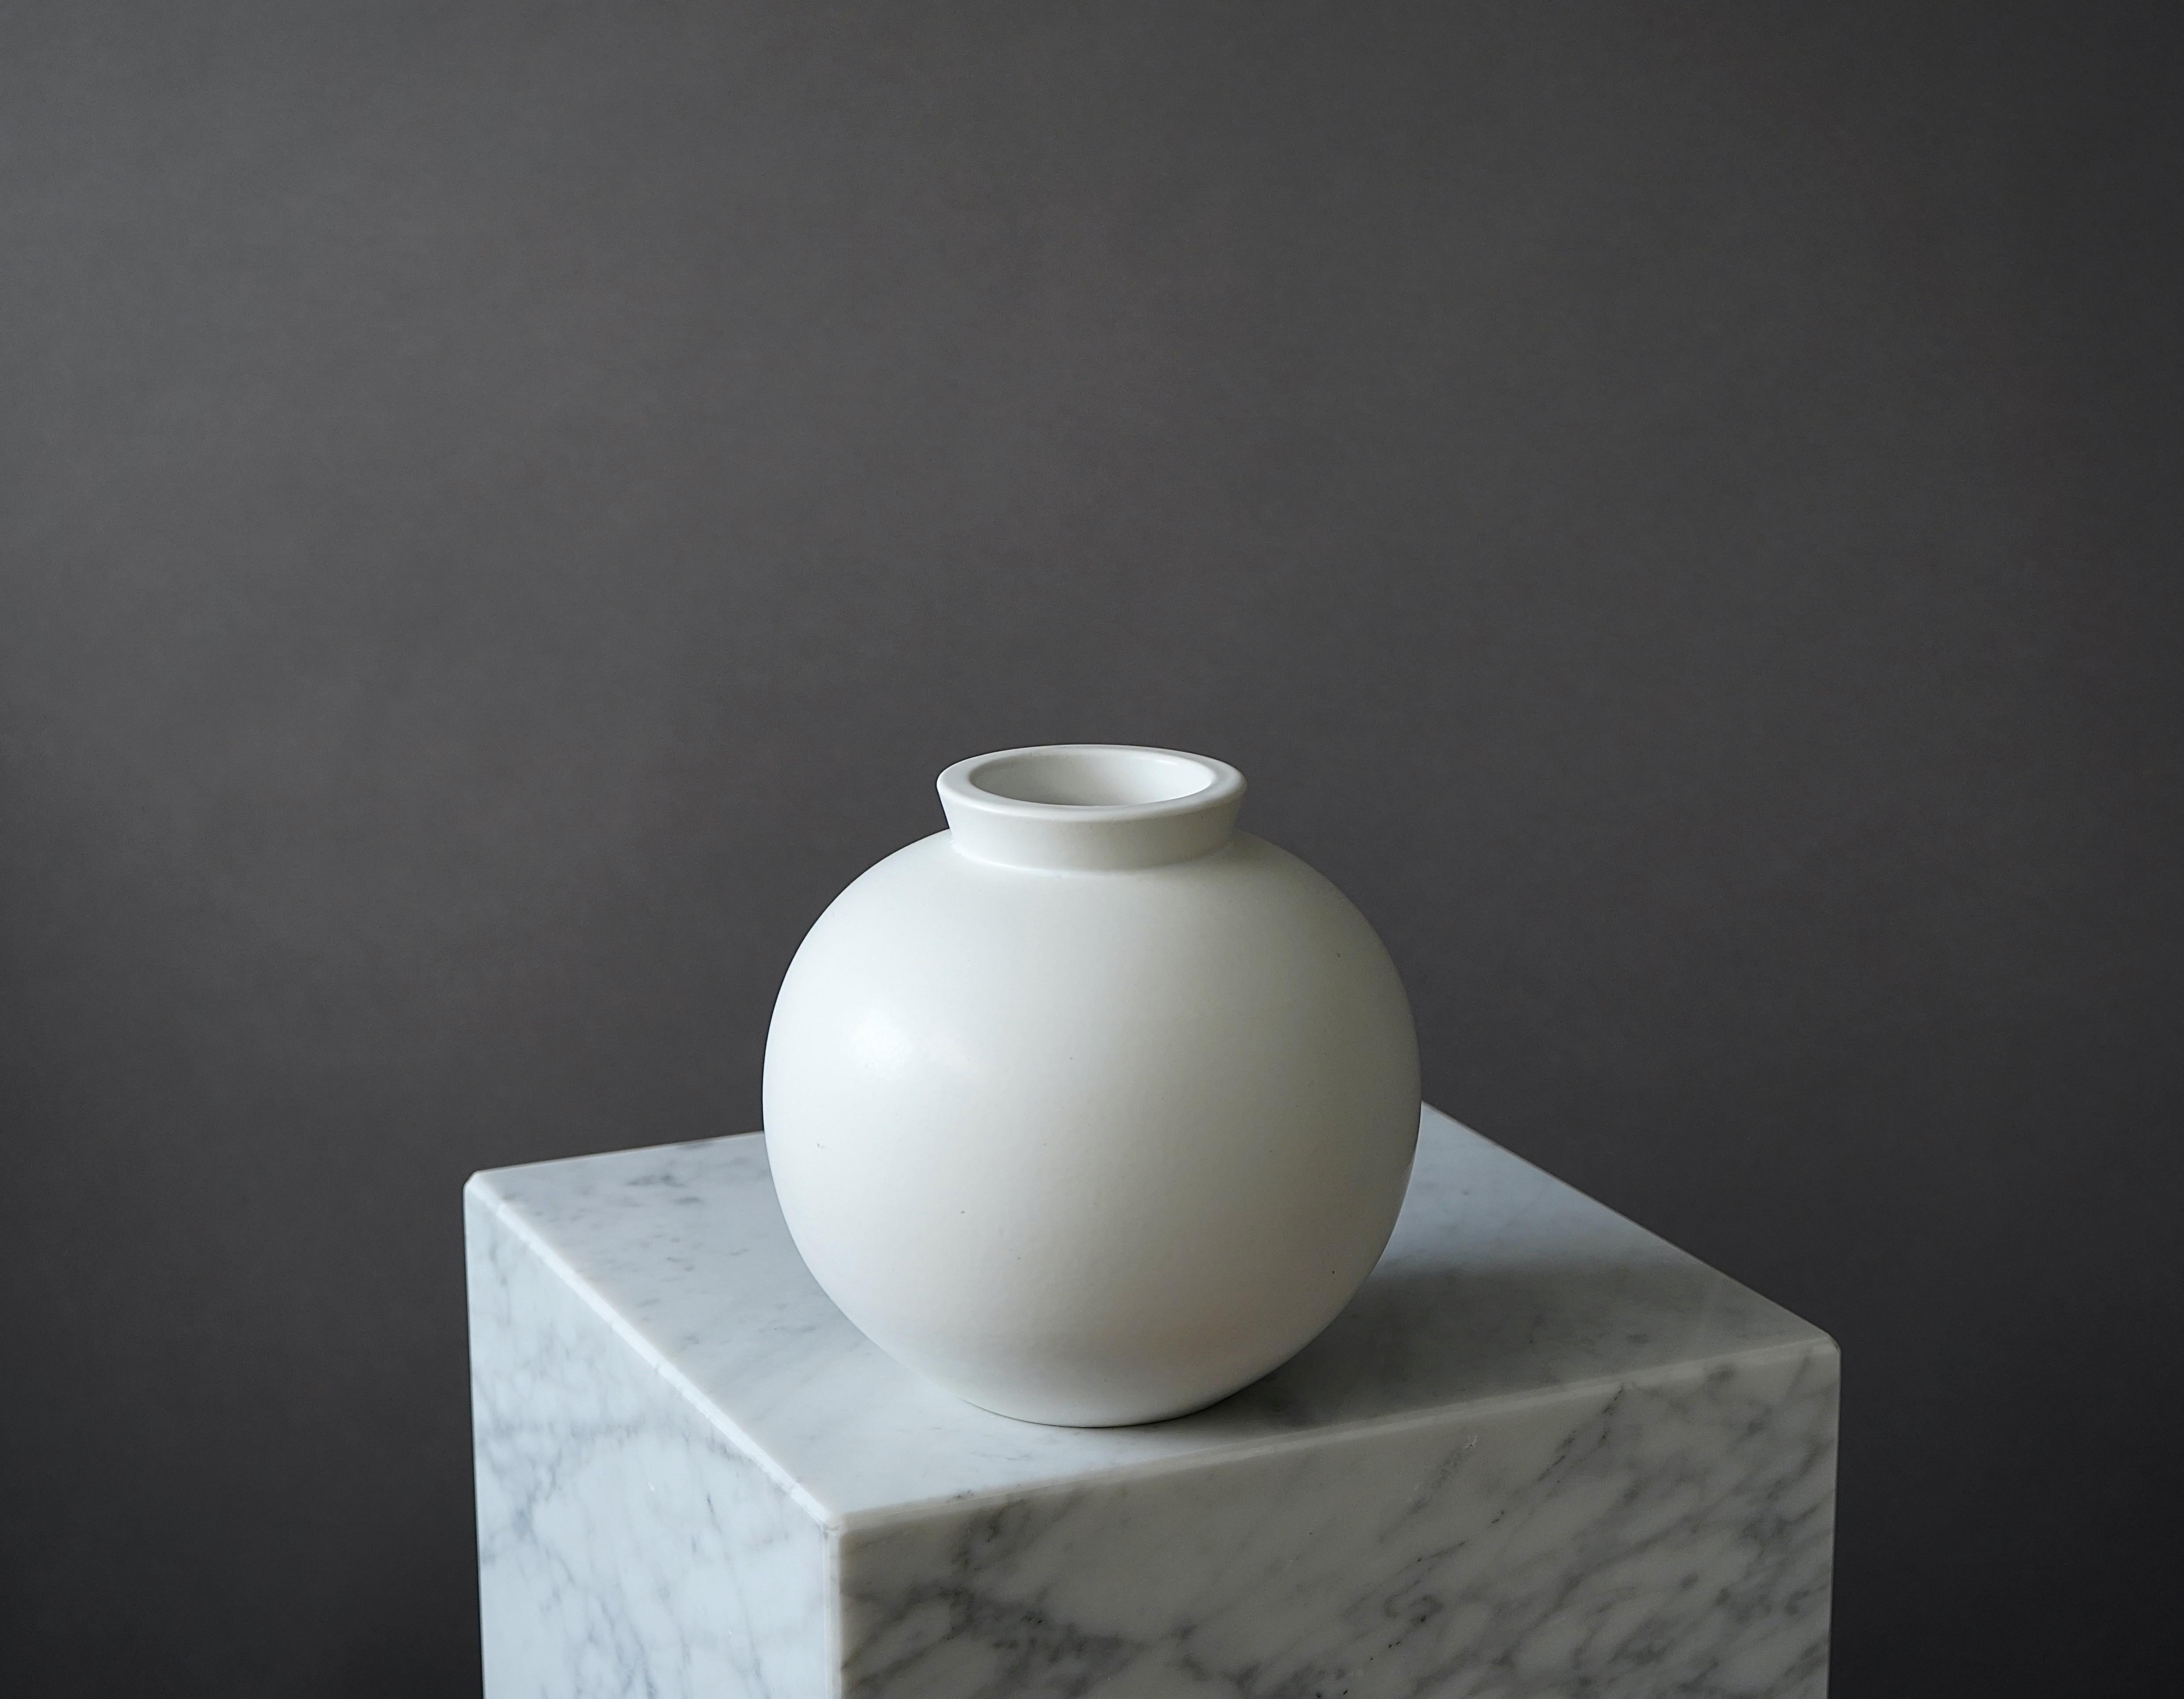 A beautiful 'Swedish Modern' stoneware vase with 'Carrara' glaze.
Made by Wilhelm Kåge at Gustavsberg in Sweden, 1930s. 

Excellent condition. 
Impressed 'Gustavsberg / KÅGE / HANDDREJAD'.

Wilhelm Kåge was a Swedish artist, painter, and ceramicist.